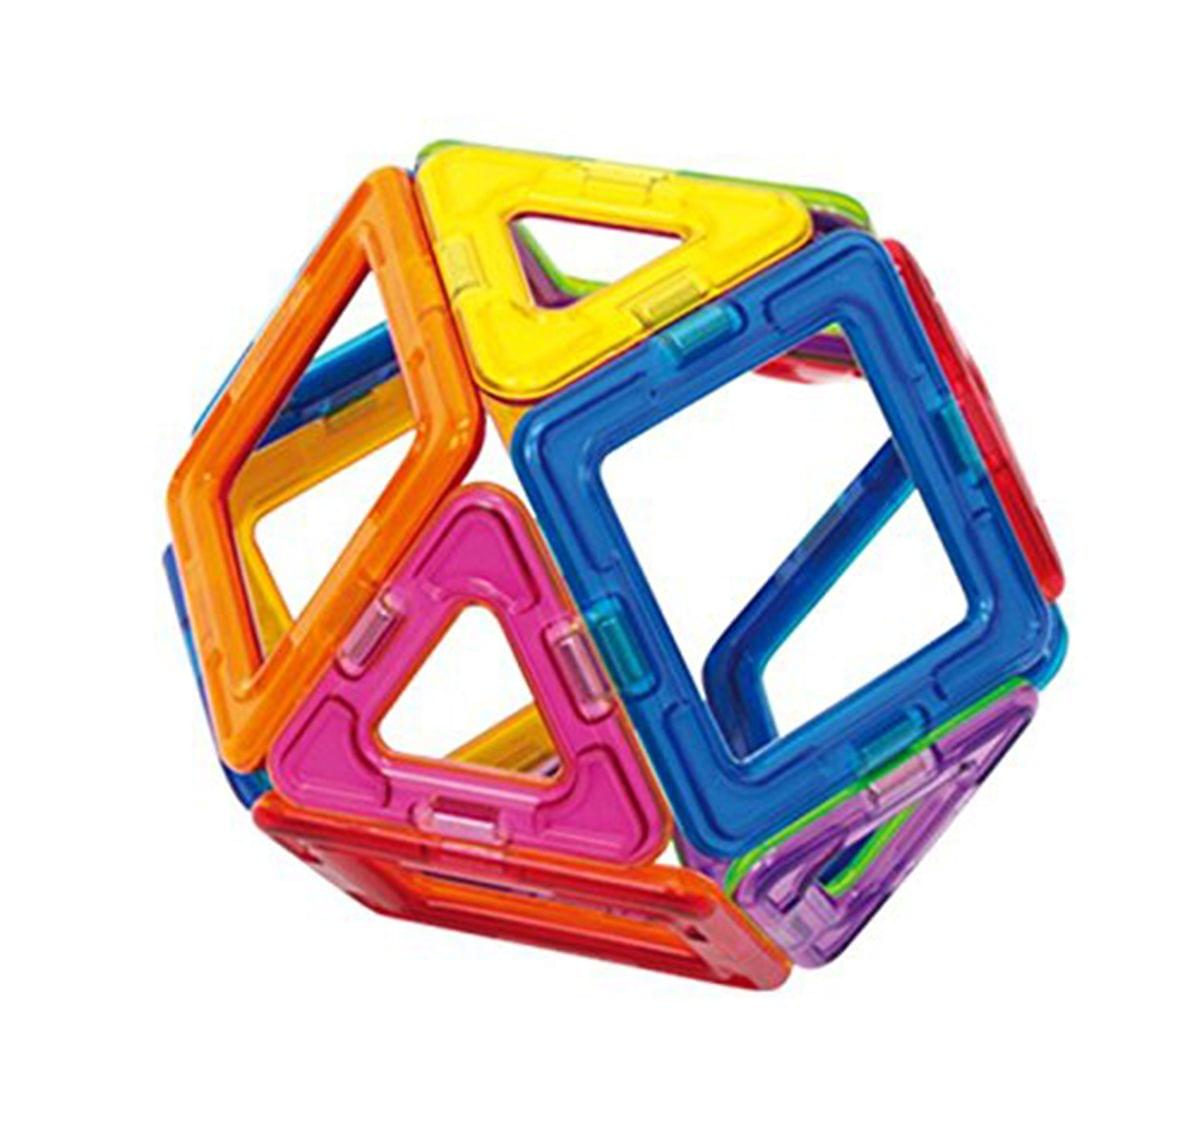 Magformers 14-Piece Magnetic Construction Set